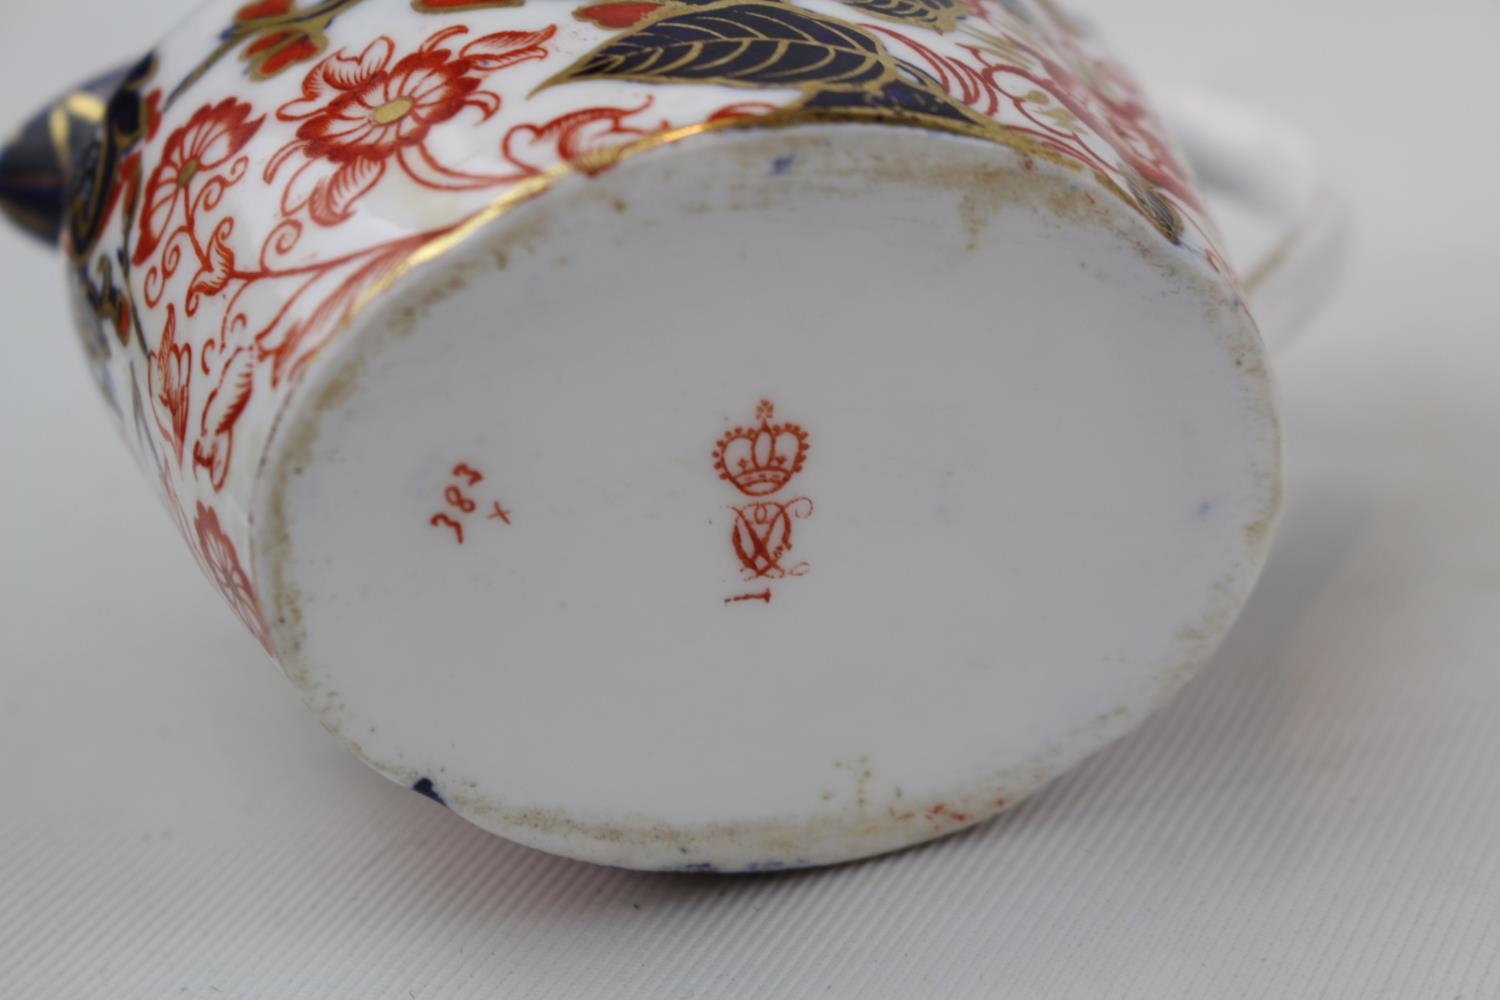 Royal Crown Derby Tete e Tete service with Cobalt blue and gilt decoration - Image 2 of 2